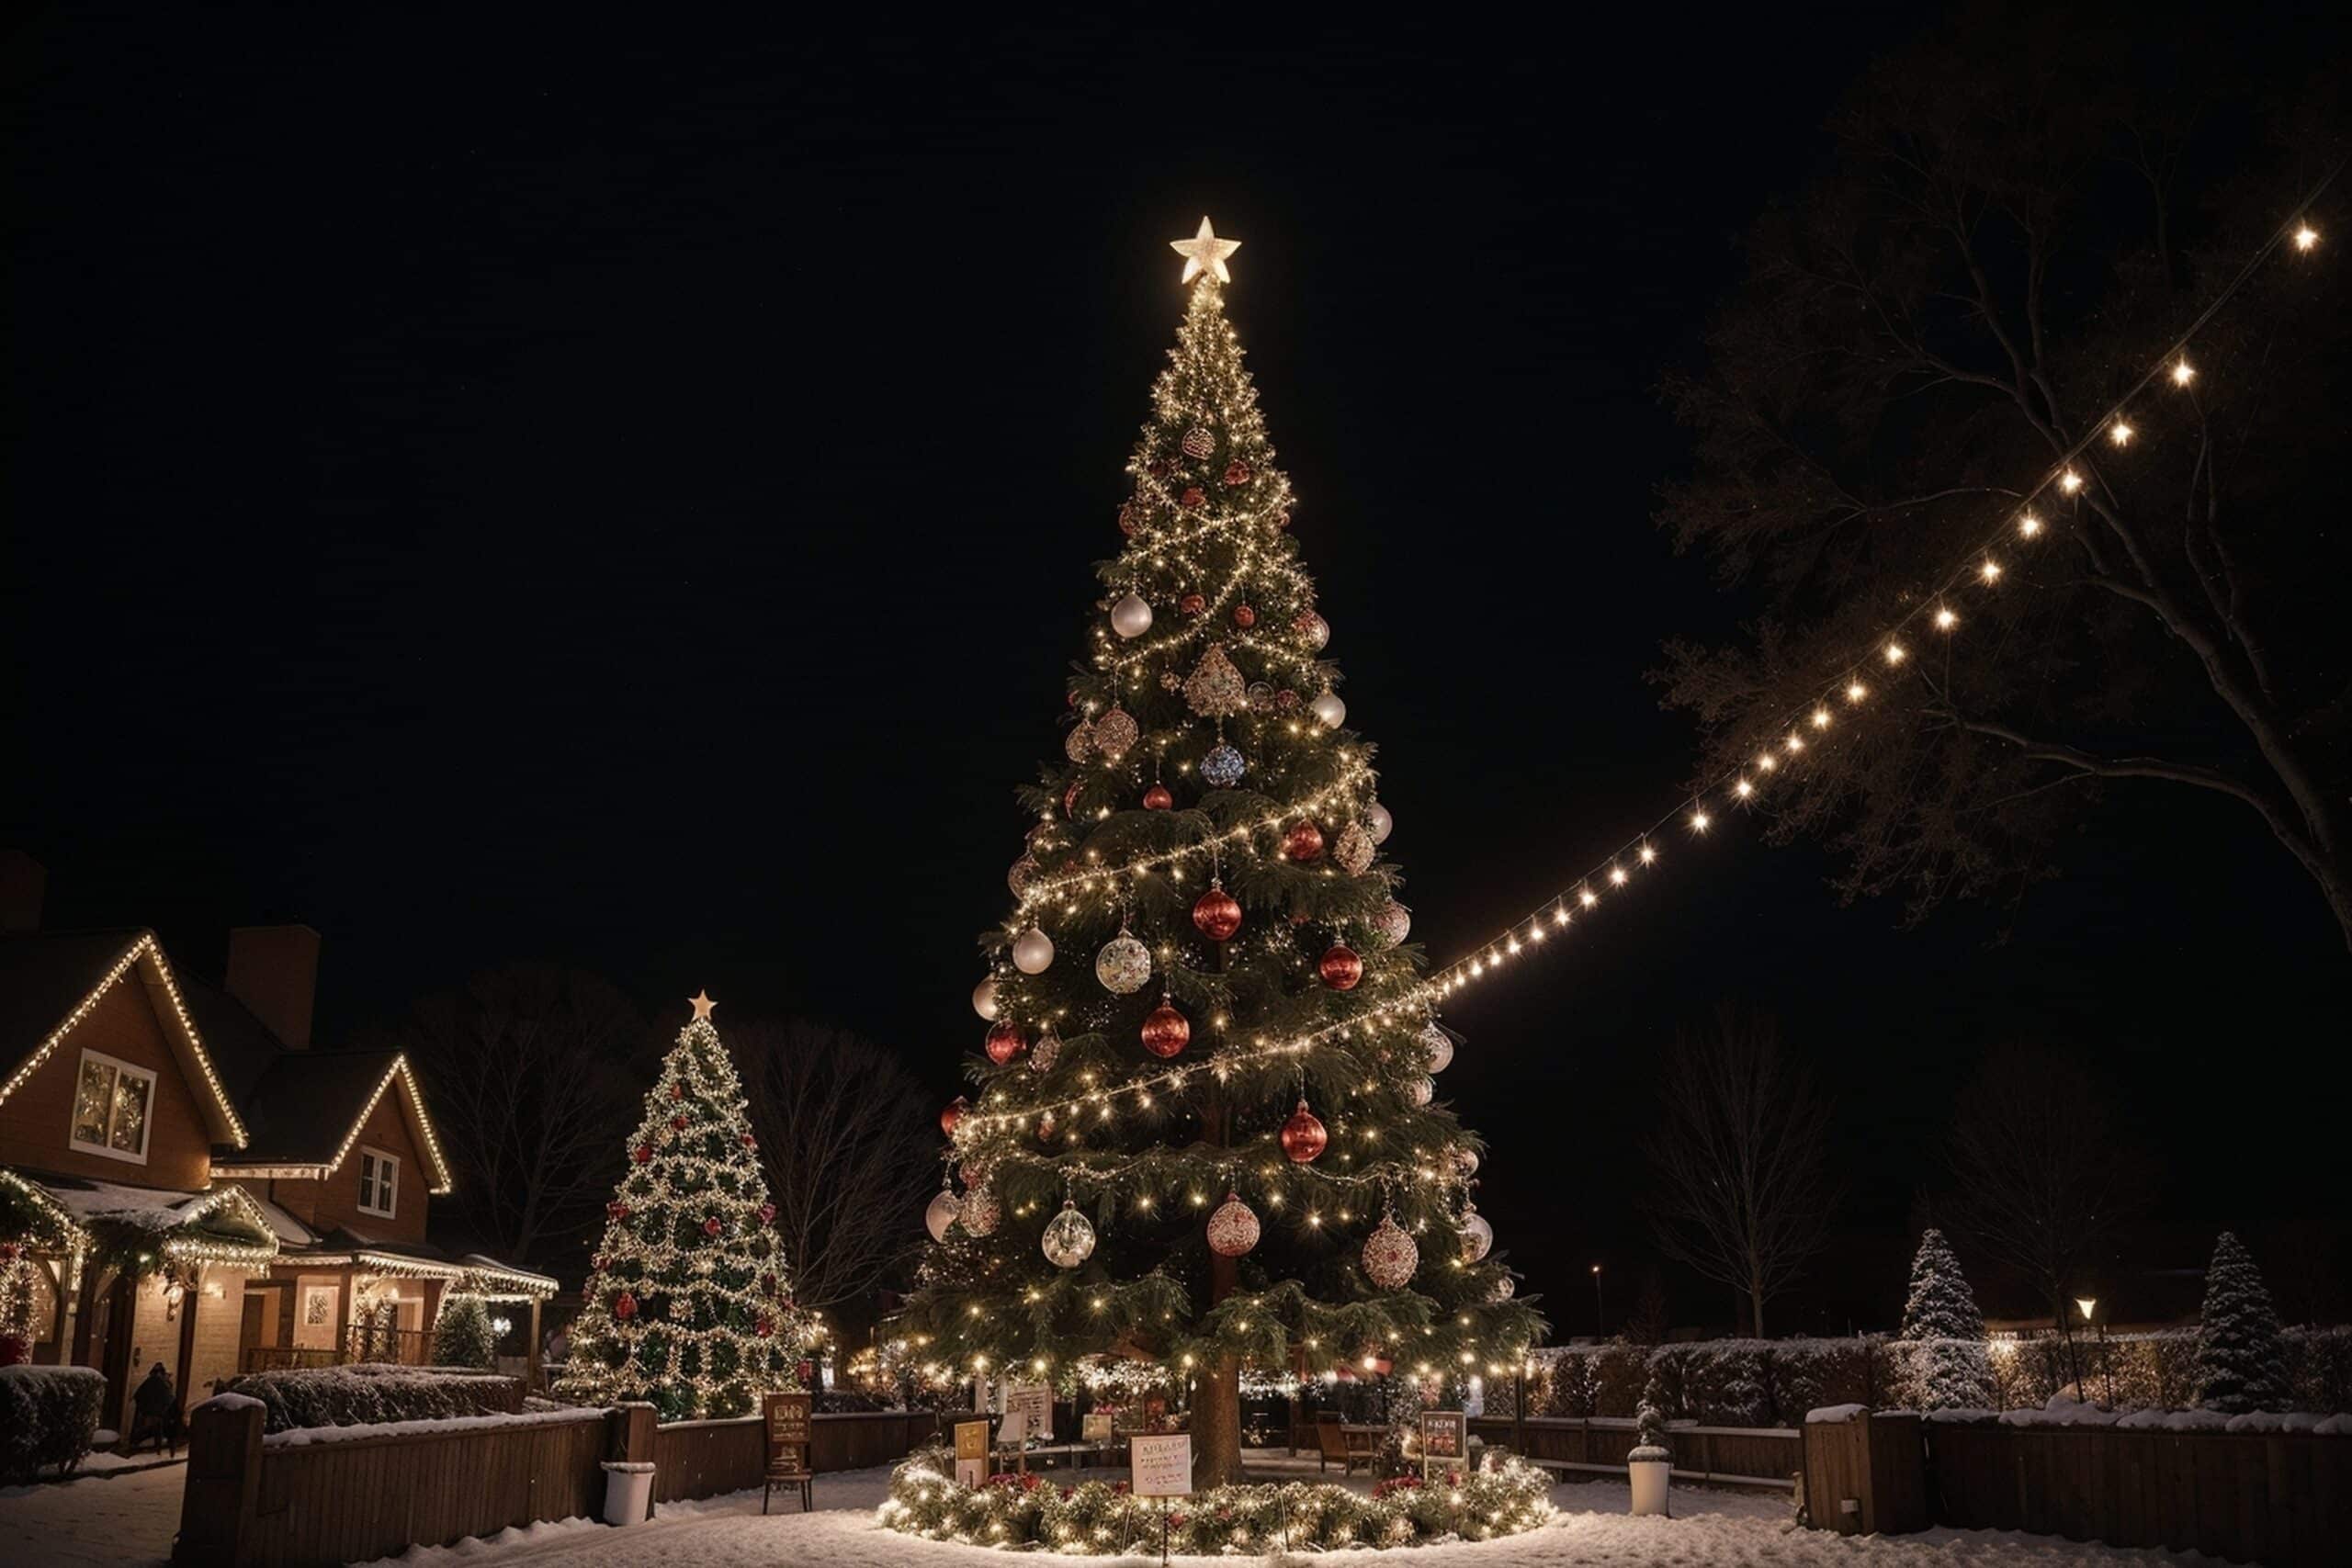 www.appr.com : How can you decorate outdoor trees with lights?